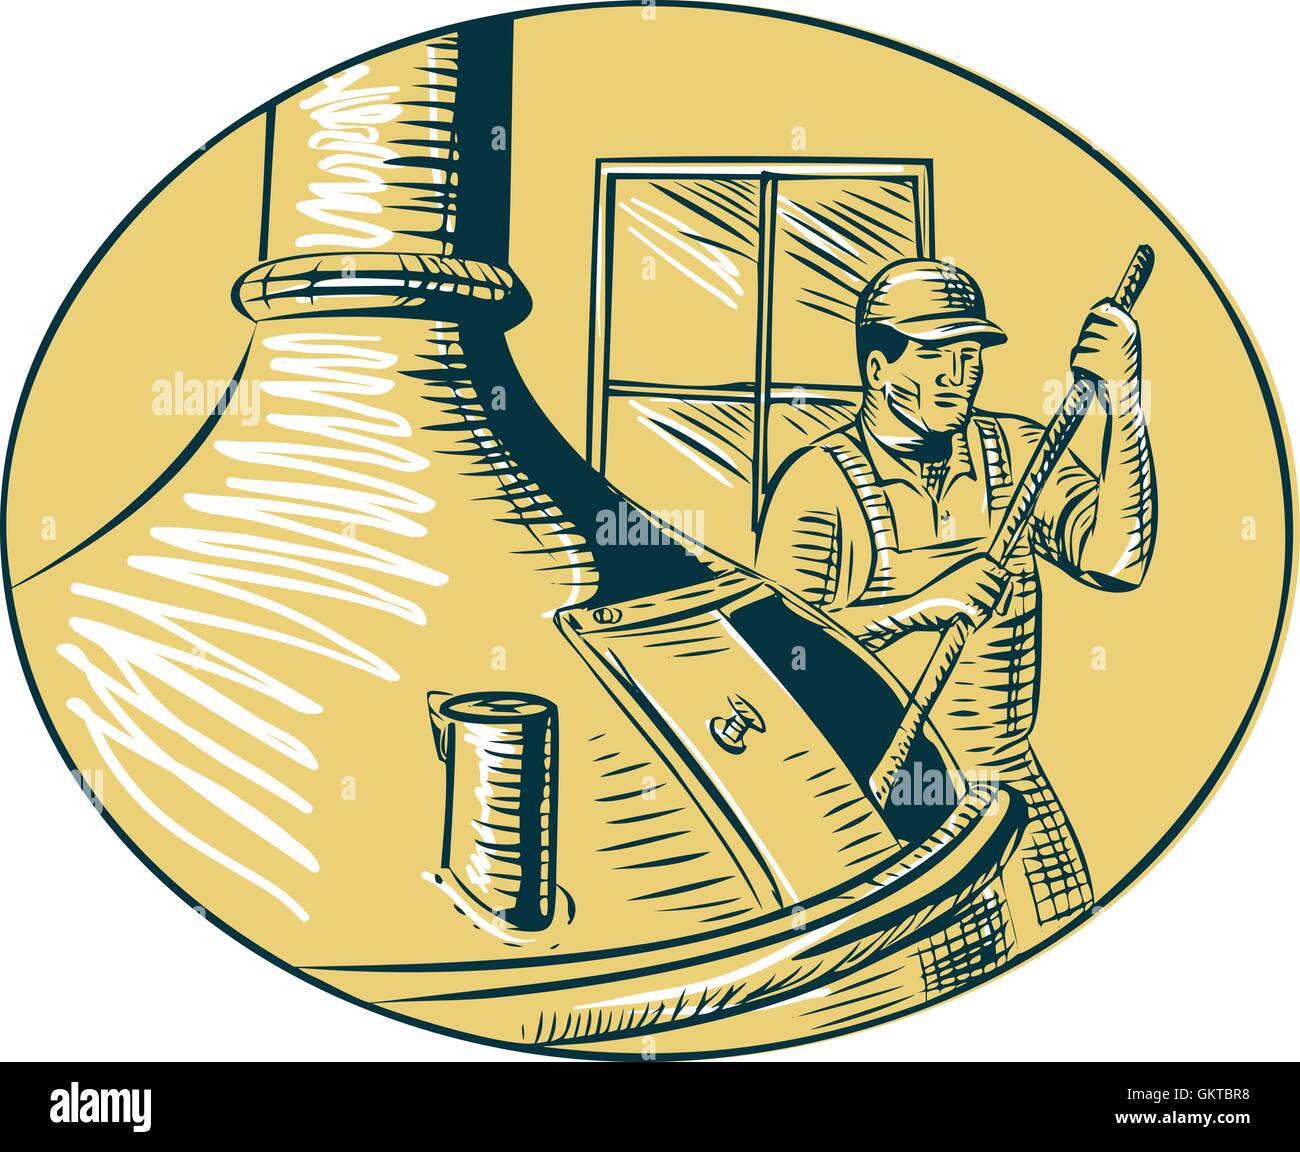 Brewmaster Brewer Brewing Beer Etching Stock Vector